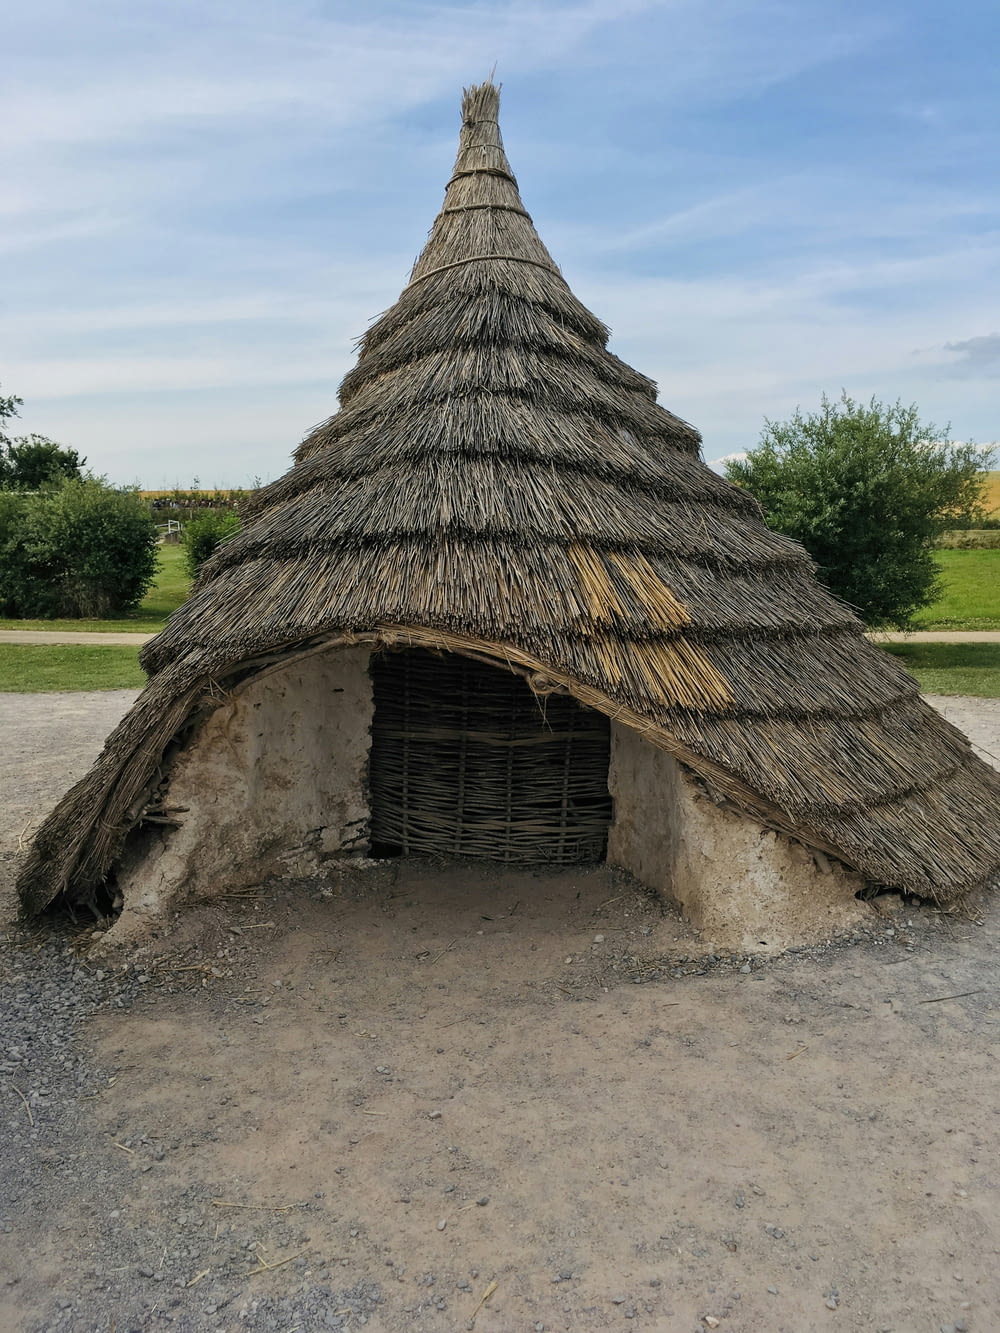 a hut with a thatched roof in a field